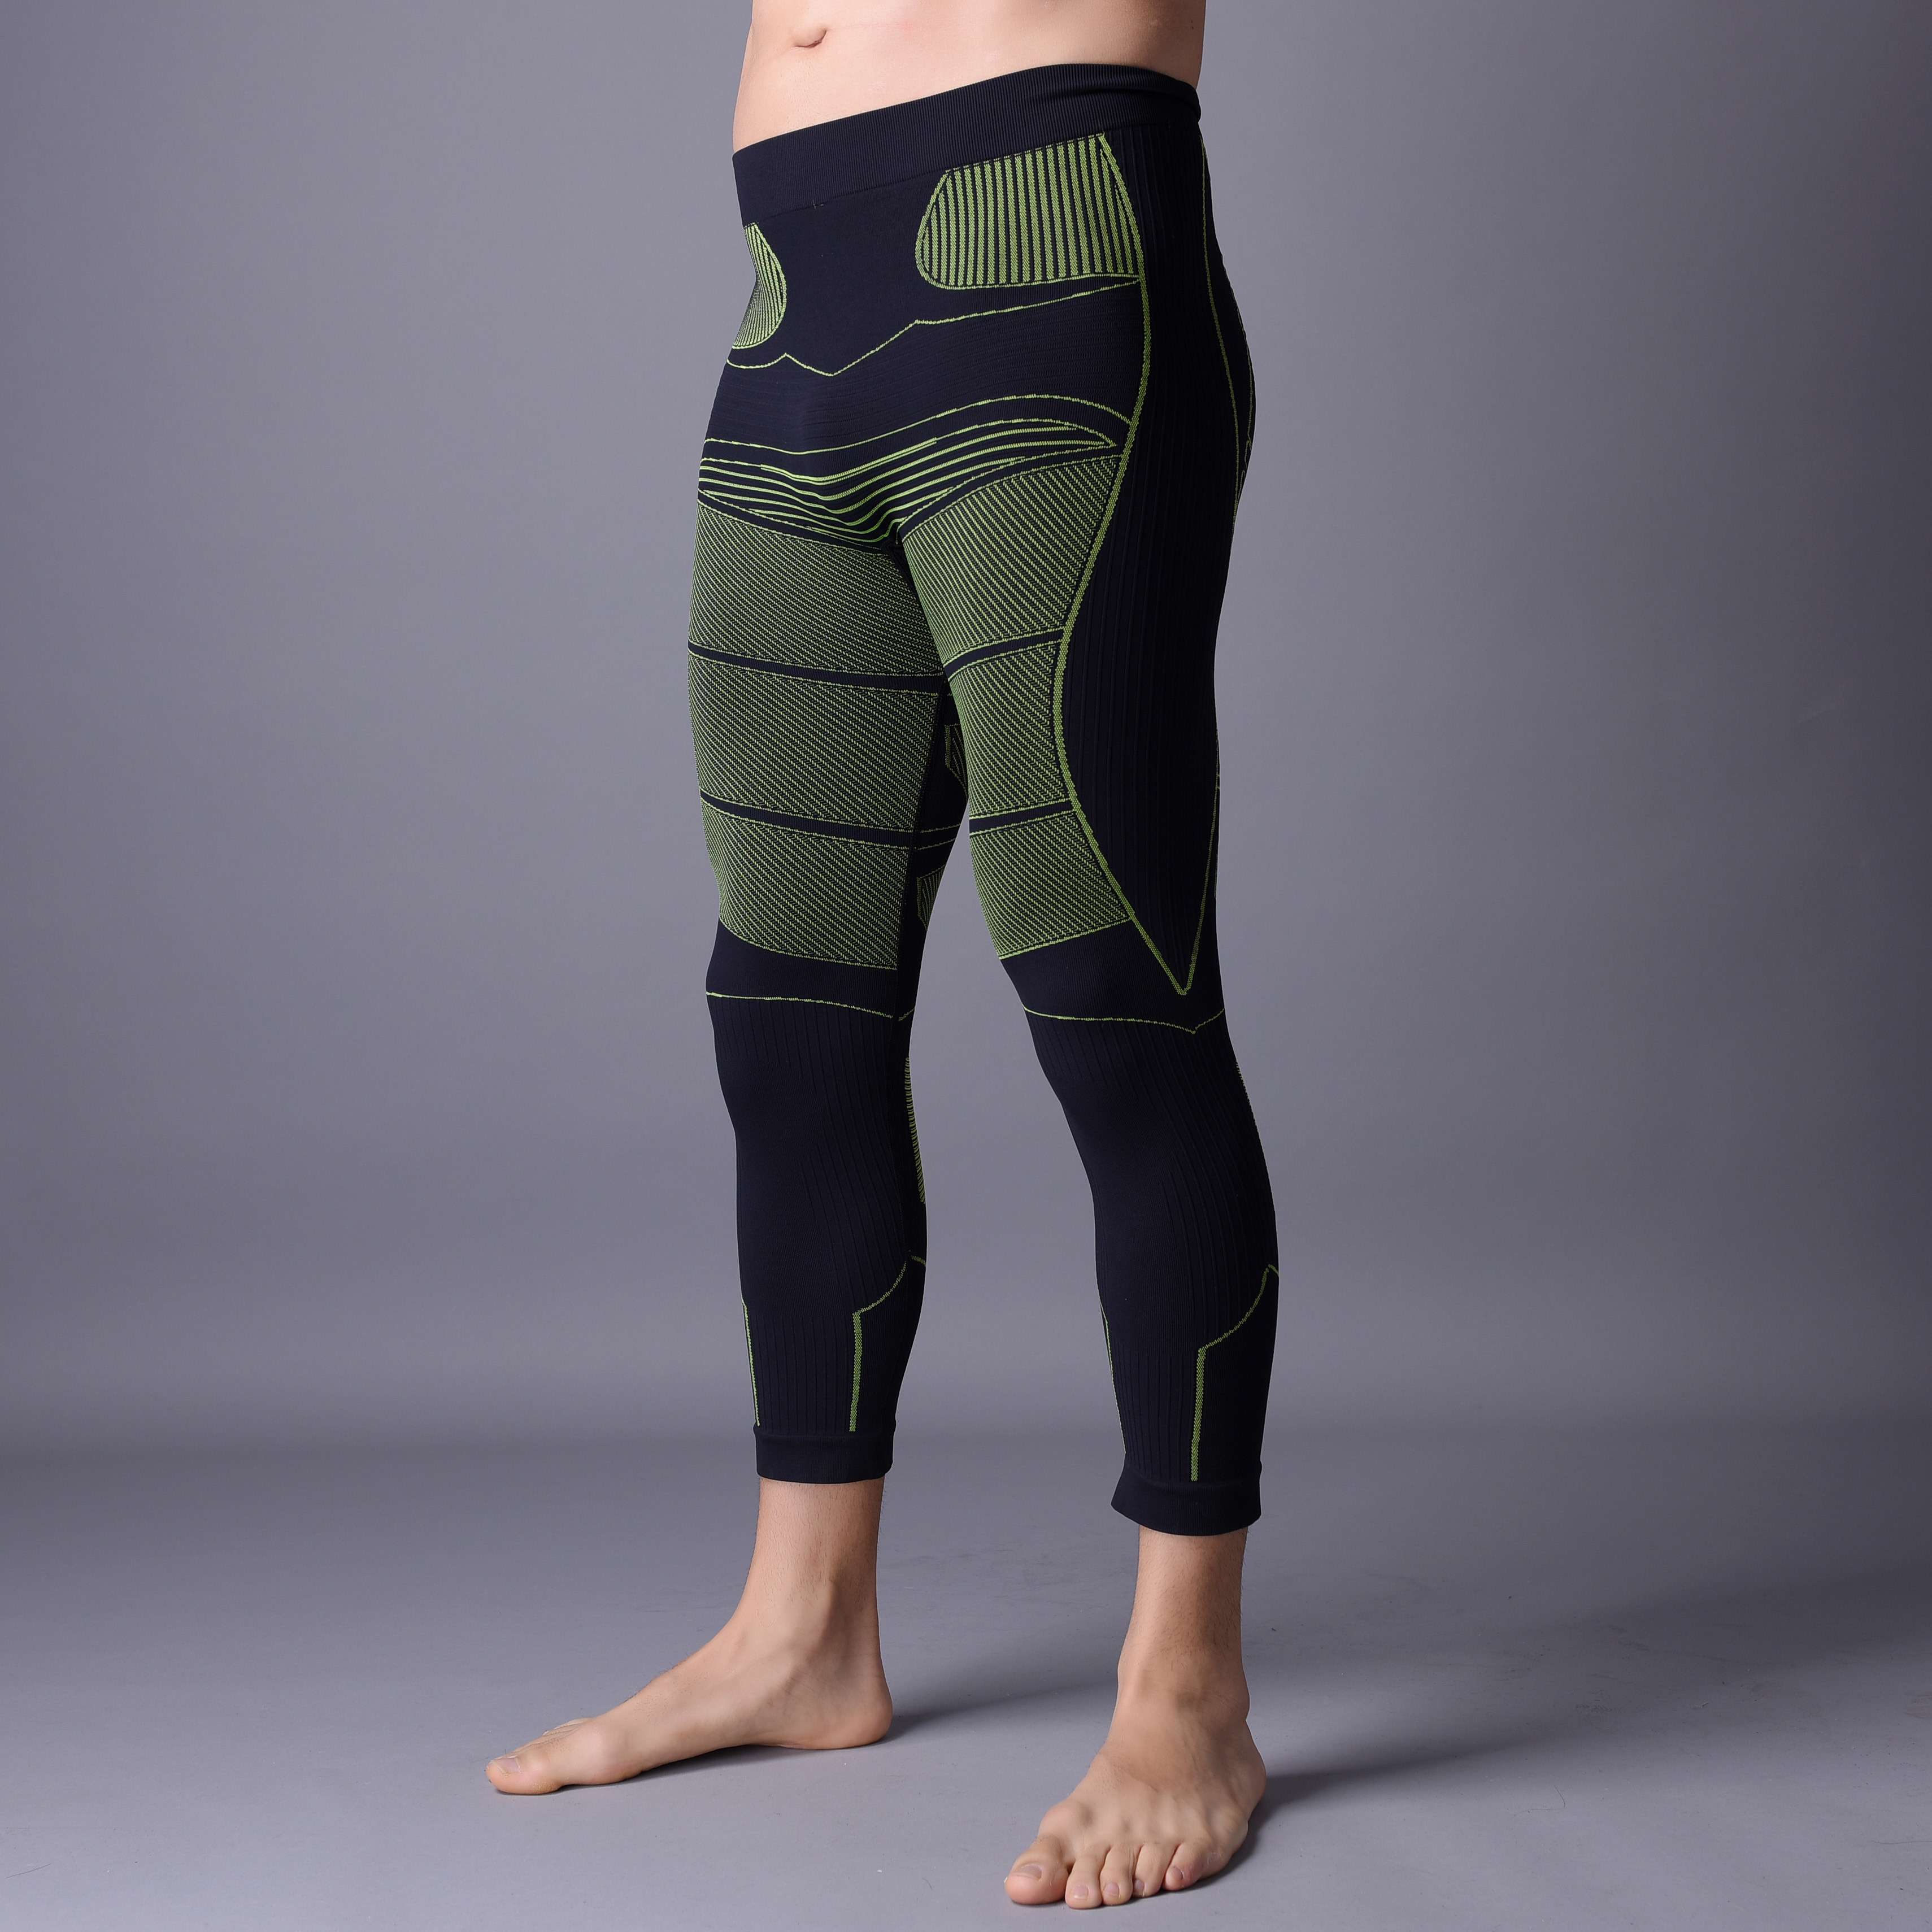 Buy cheap Men running pants with compression, black color with green. Xll003 from wholesalers